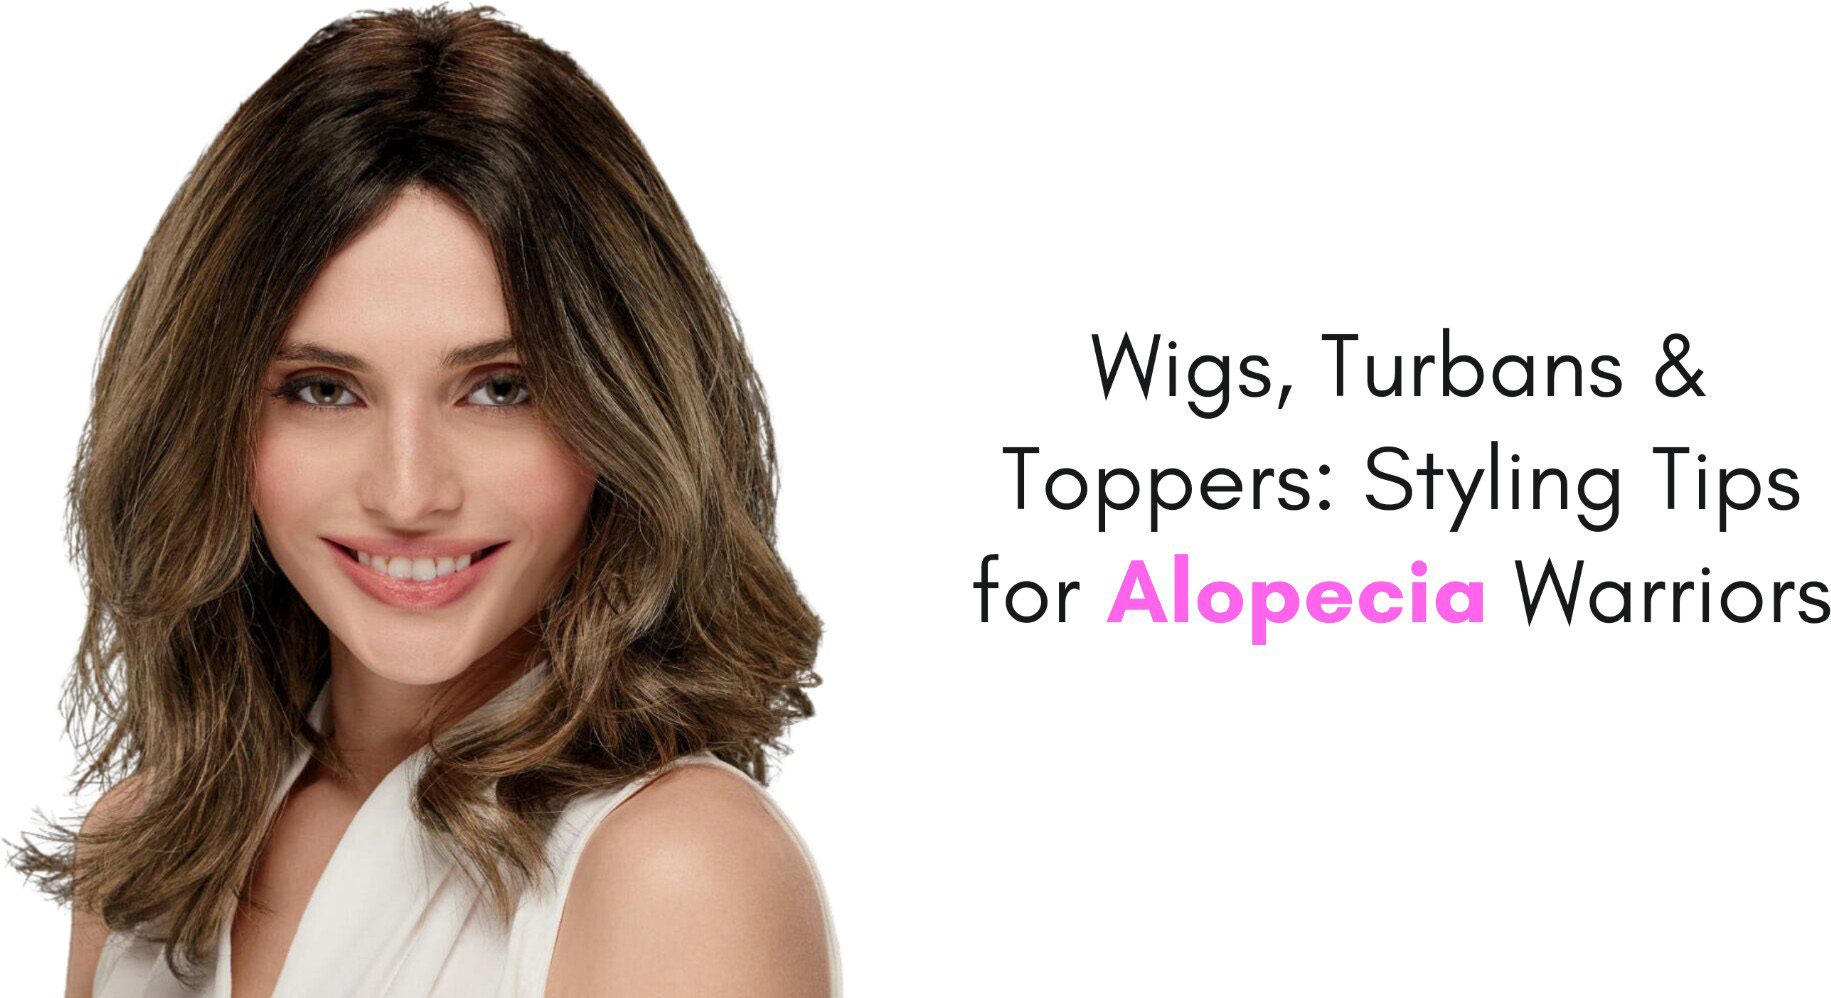 Wigs, Turbans & Toppers: Styling Tips for Alopecia Warriors